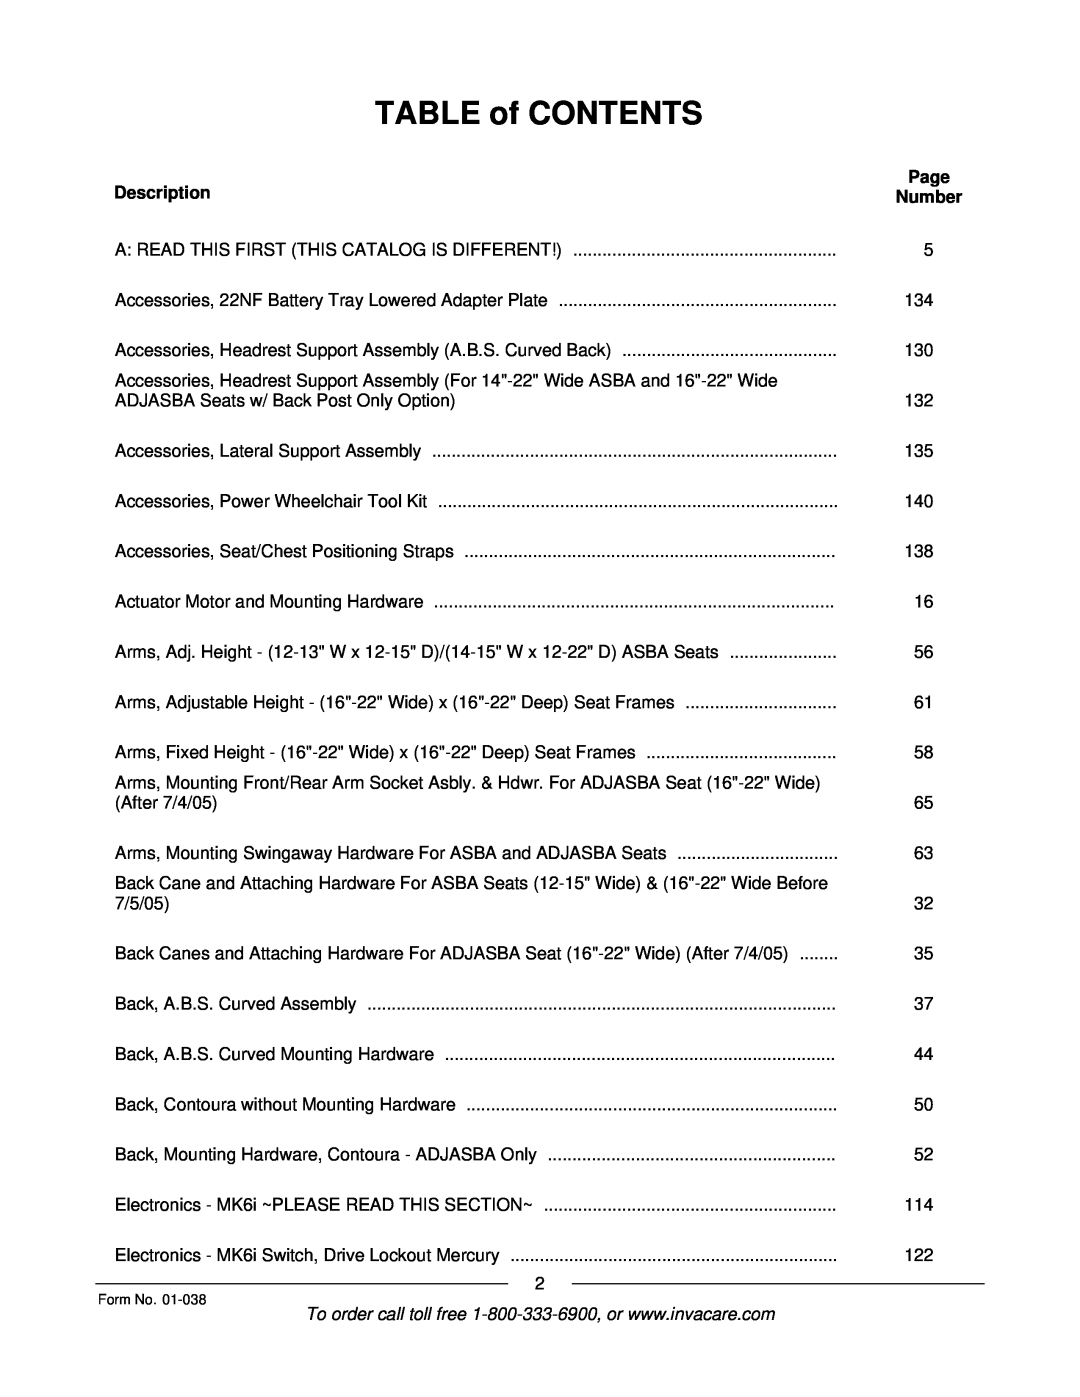 Invacare ESS-PTO, PTO-STM manual TABLE of CONTENTS, Description, Number, Page 